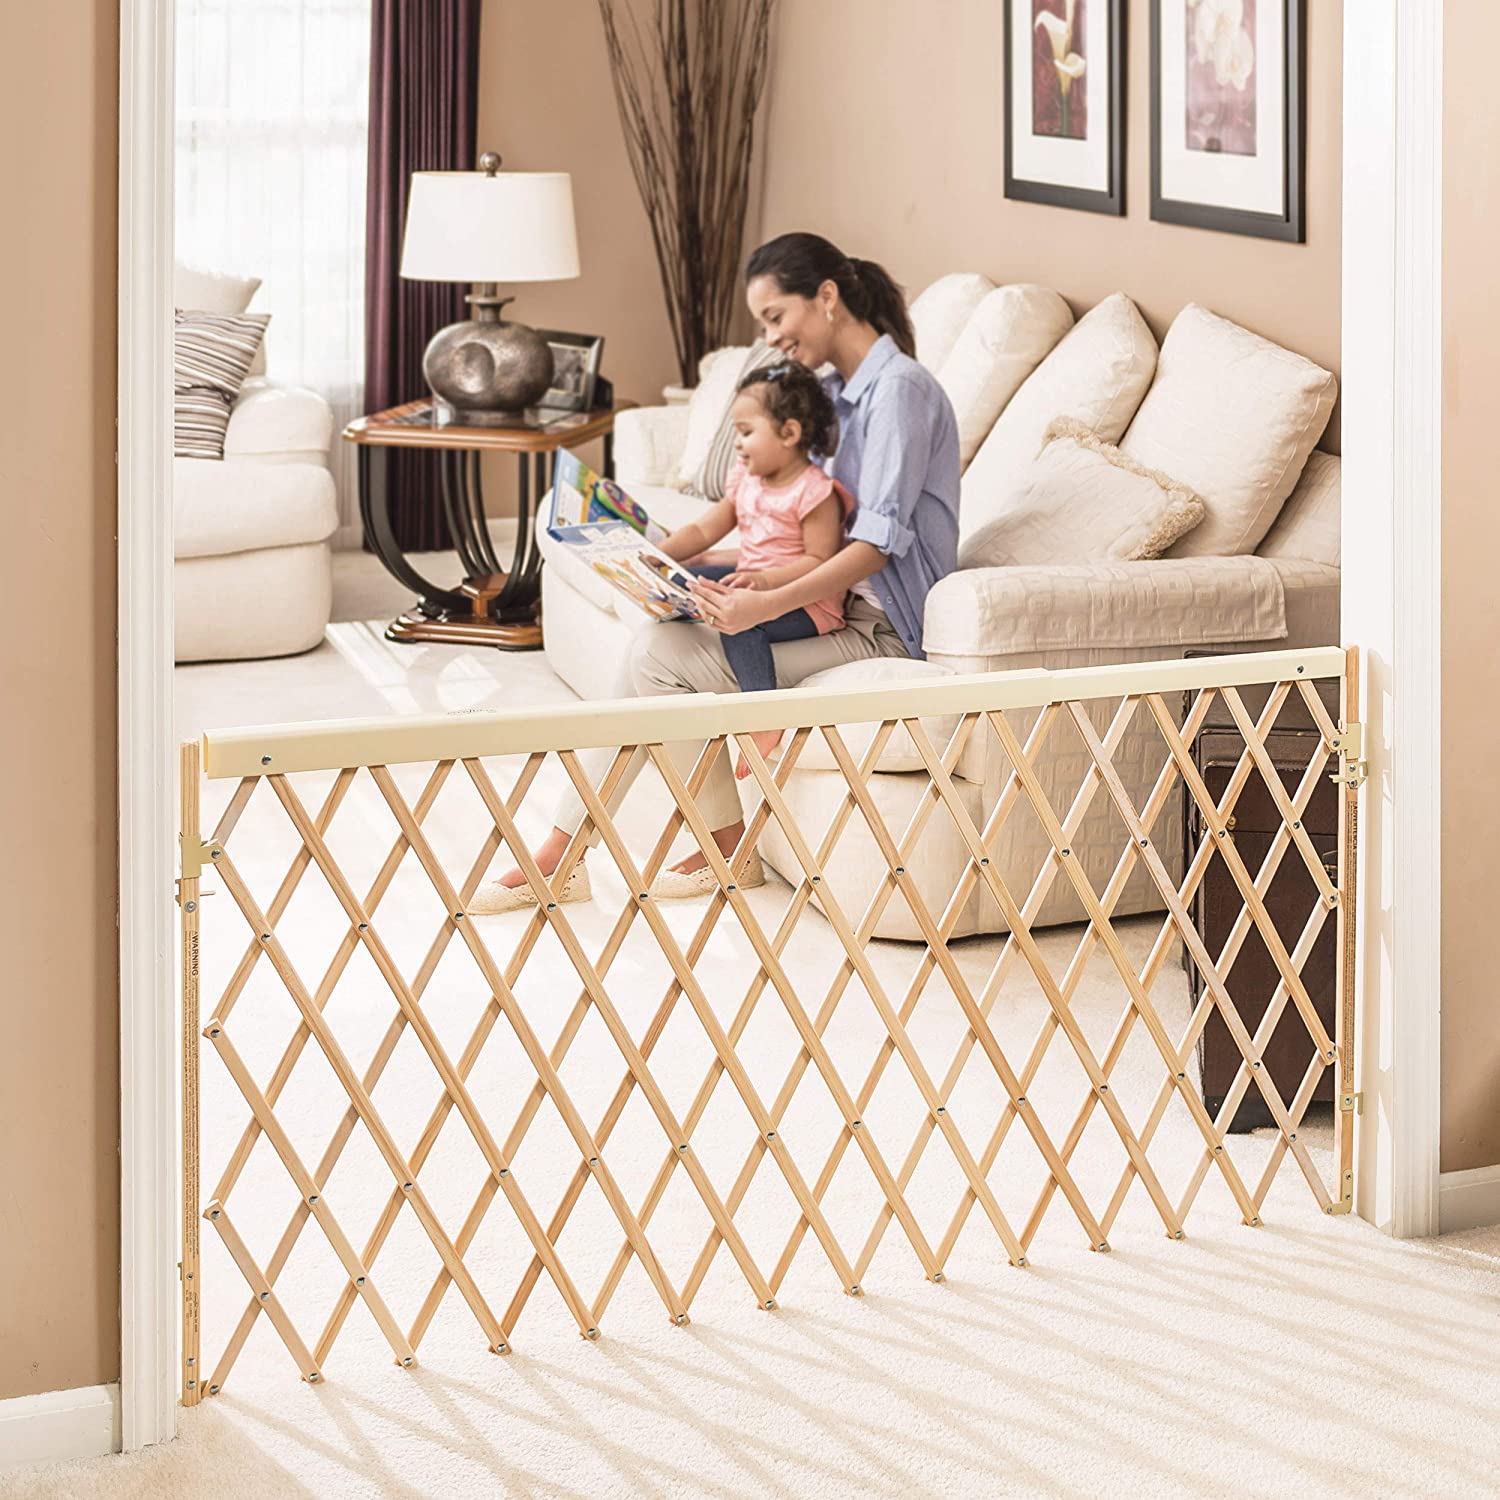 babyproof products - gated baby proofing